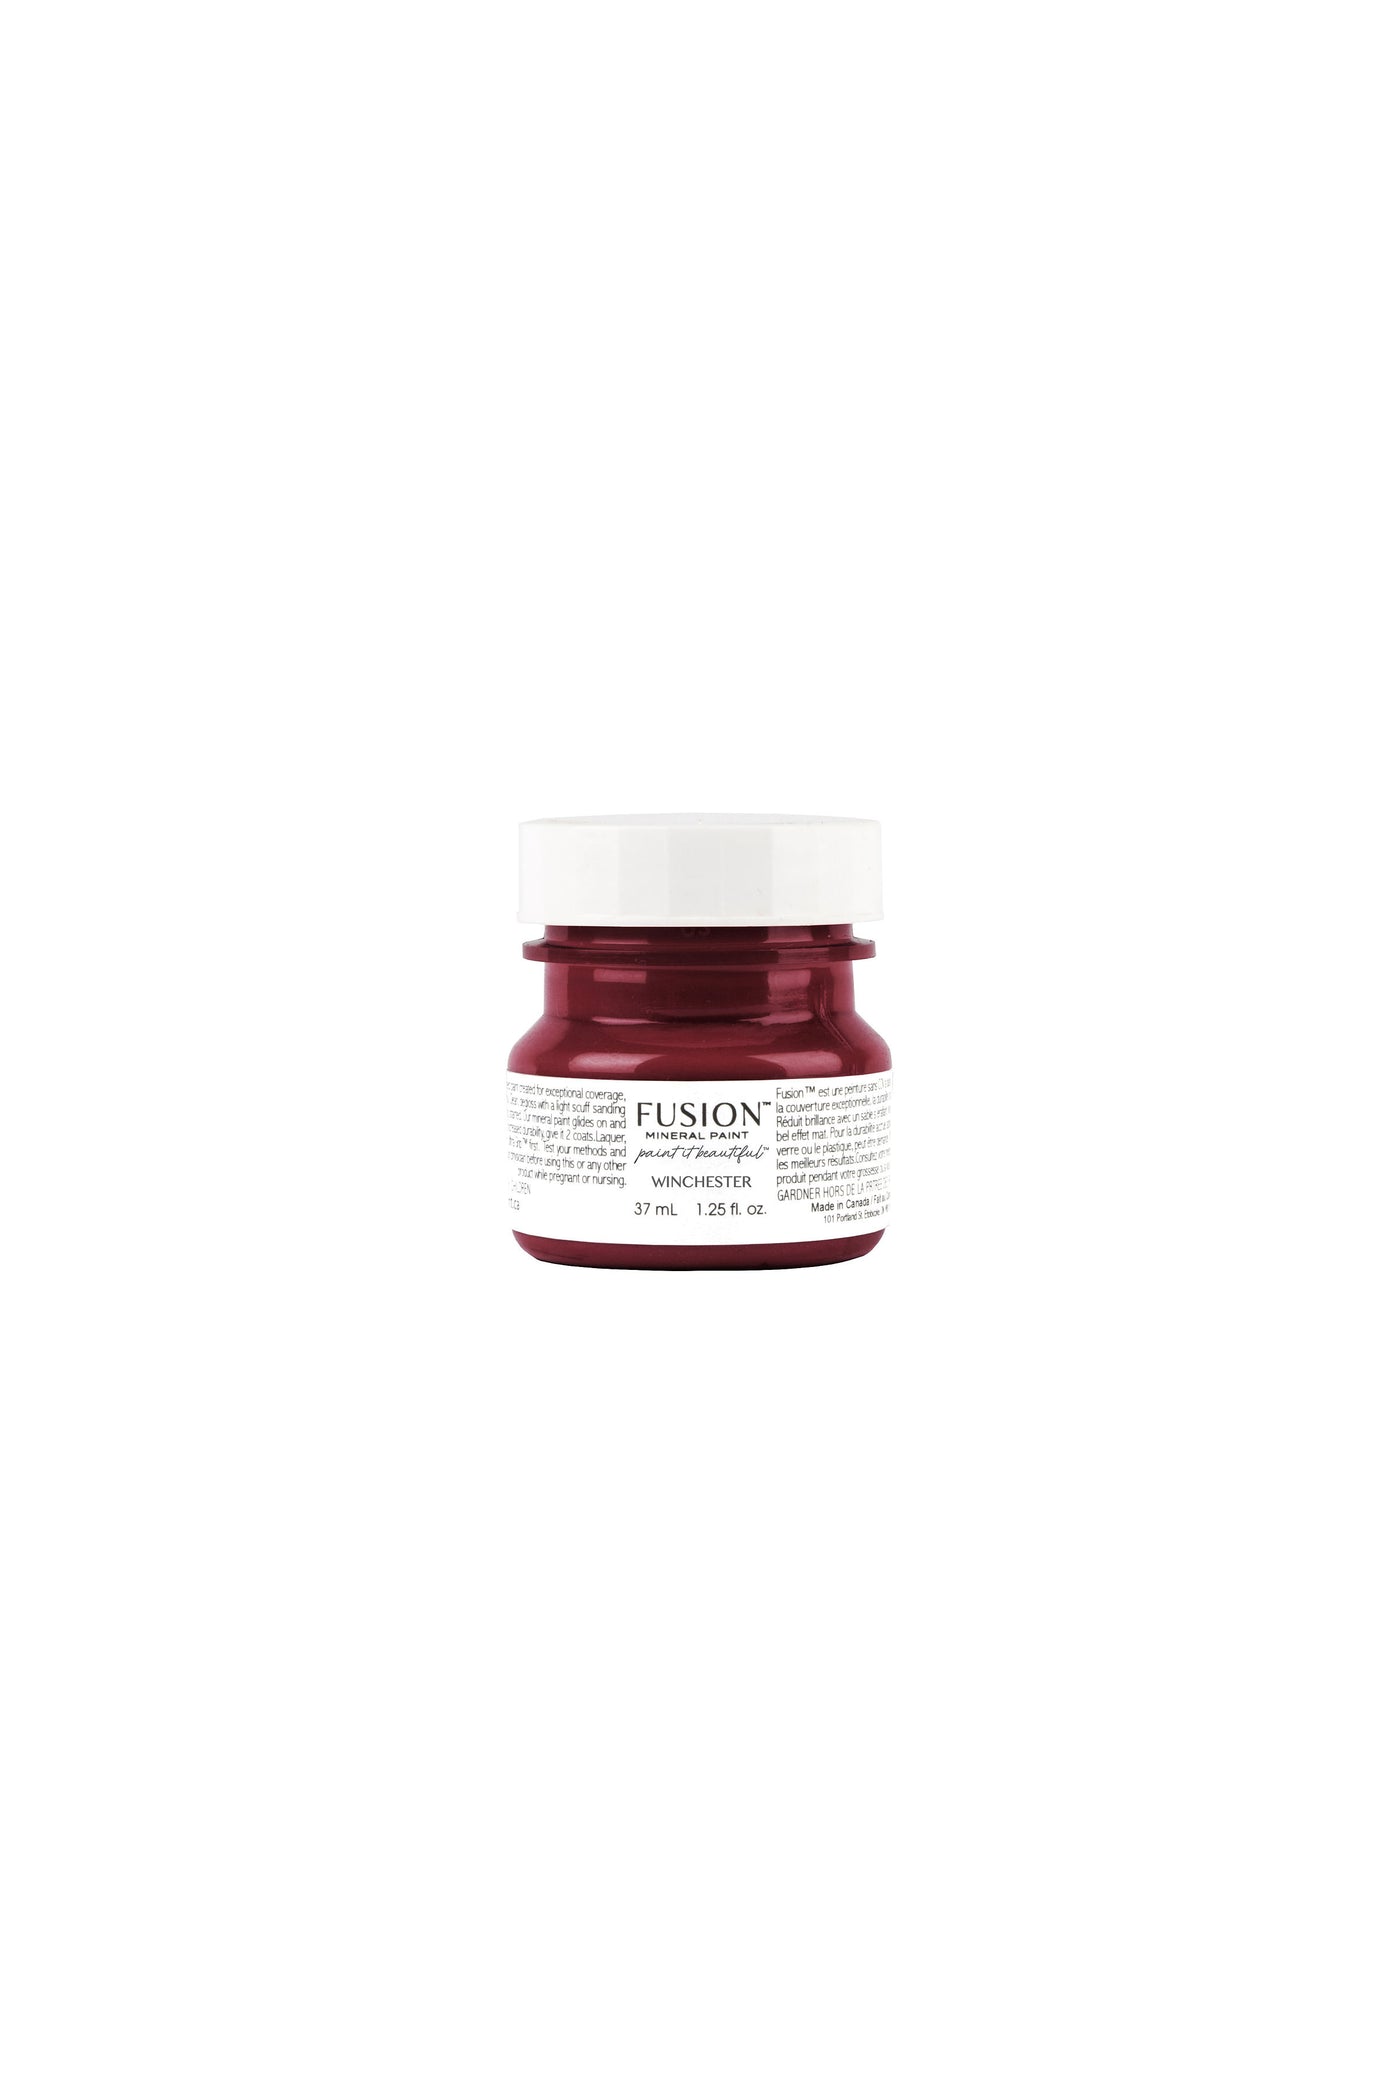 Fusion Mineral Paint Winchester deep burgundy 2 sizes For the Love Creations Australian retailer